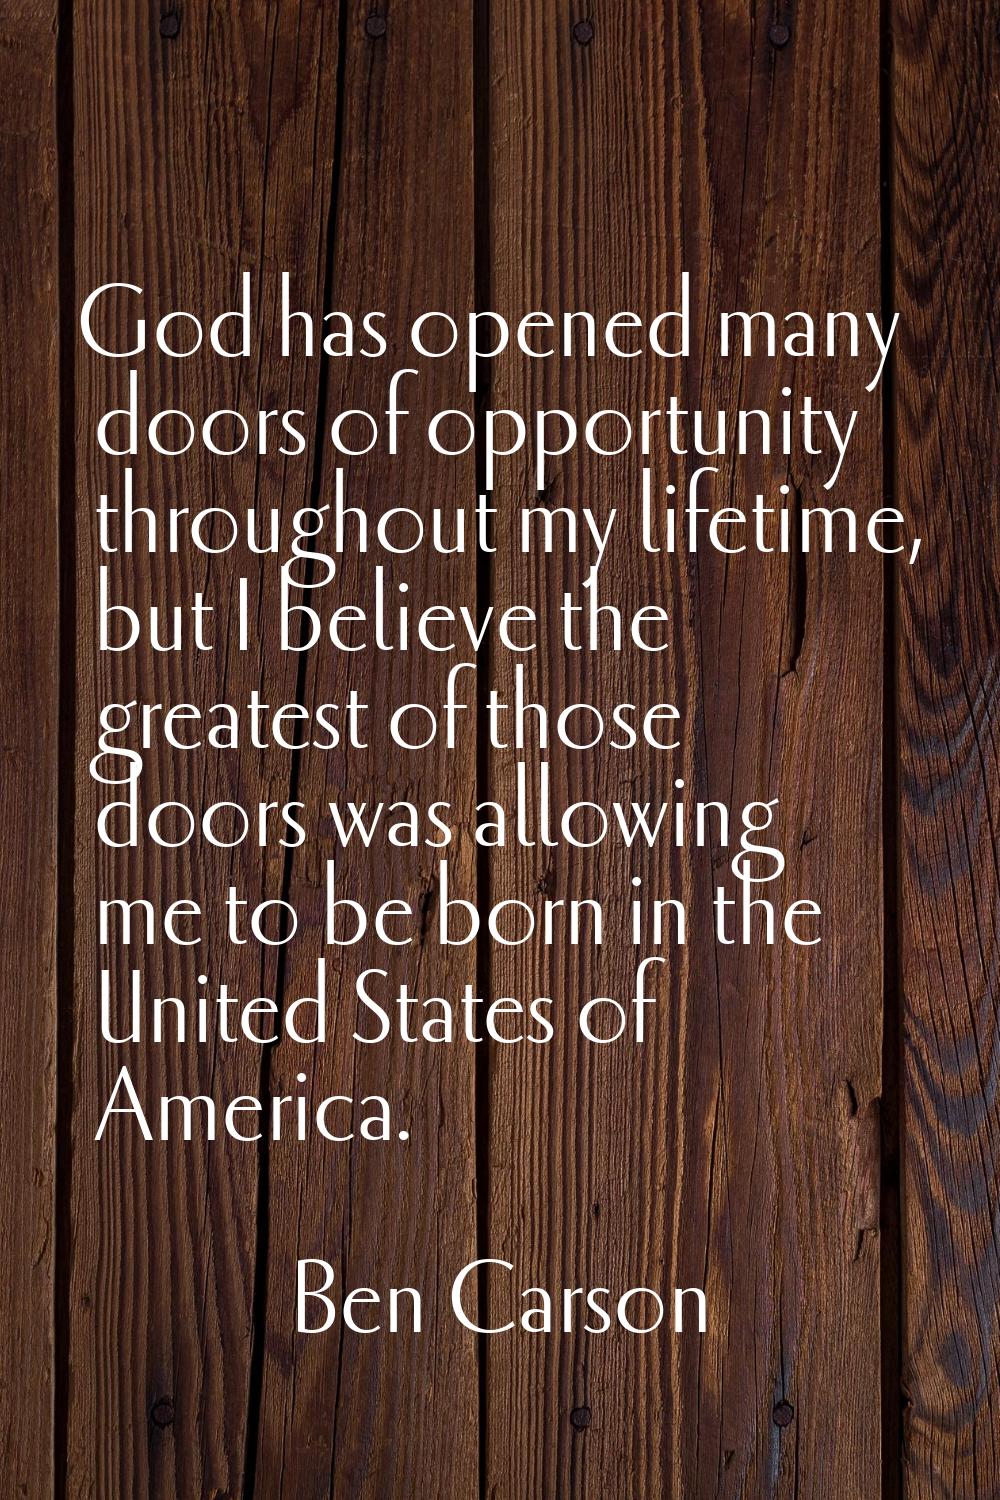 God has opened many doors of opportunity throughout my lifetime, but I believe the greatest of thos